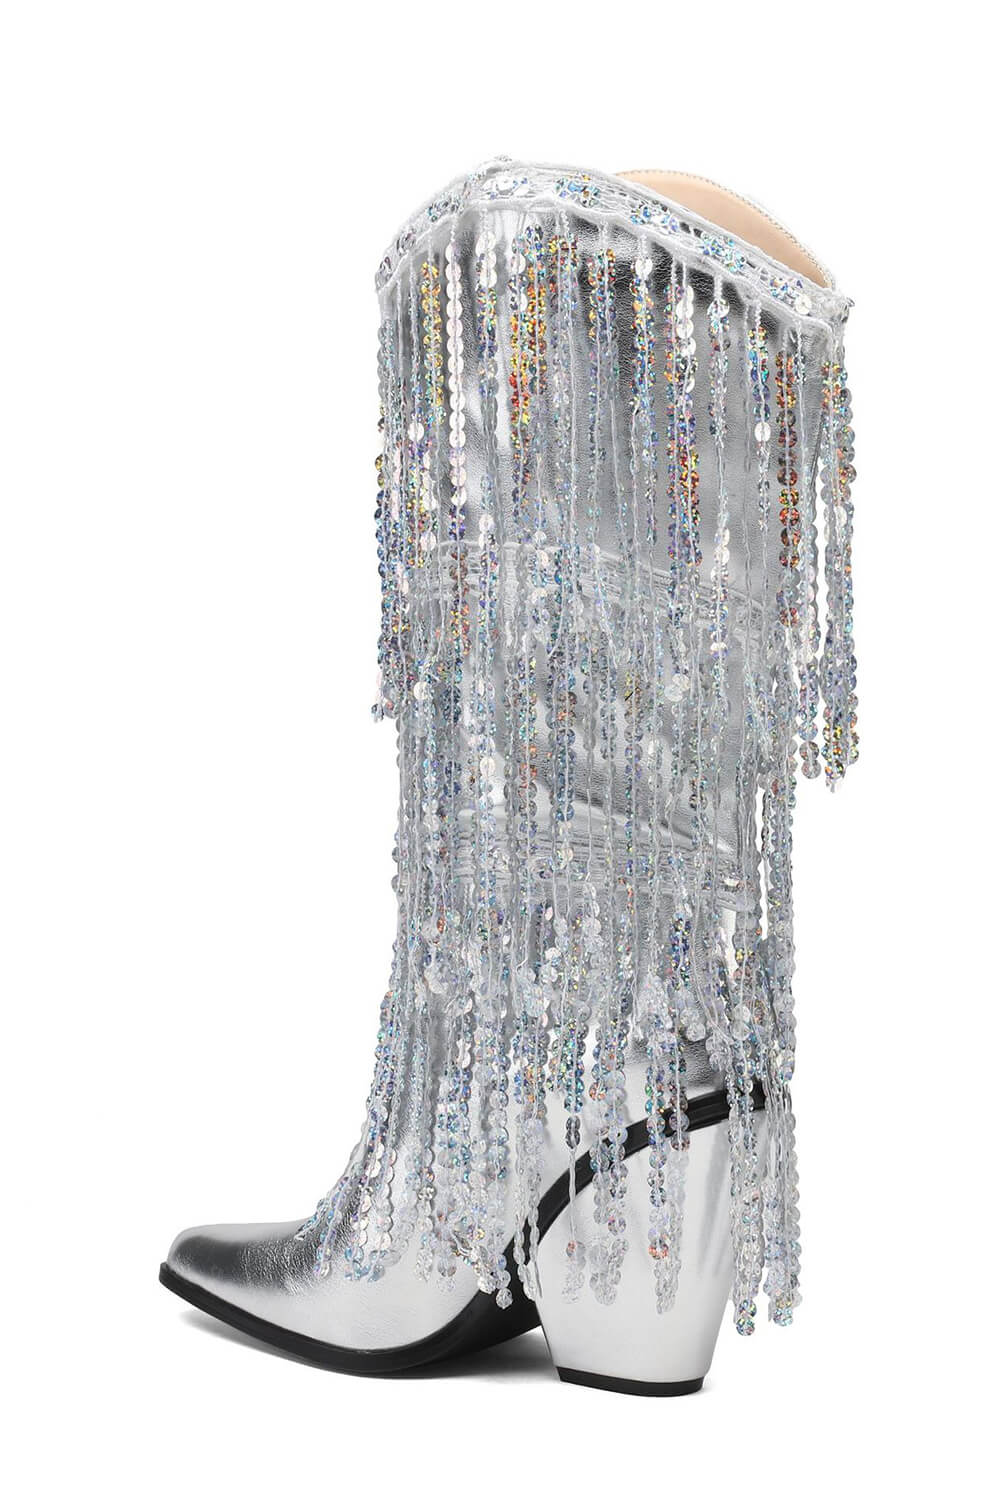 Faux Leather Sequined Fringe Western Mid-Calf Bootie - Silver Metallic